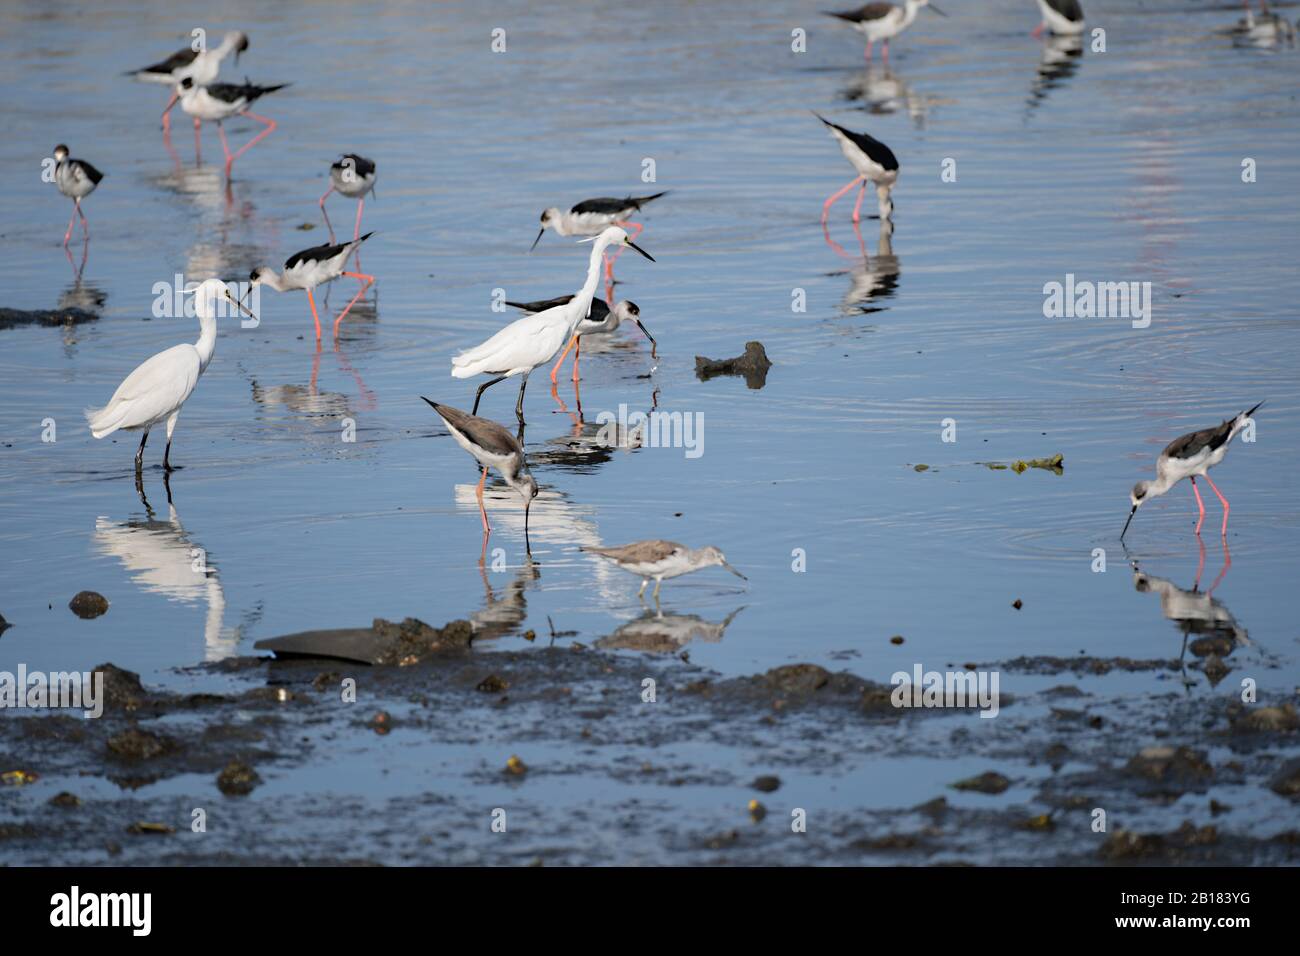 Little Egrets,Black-winged stilts & other wading birds in a shallow estuary mud flat searching for food.Cebu City,Philippines Stock Photo